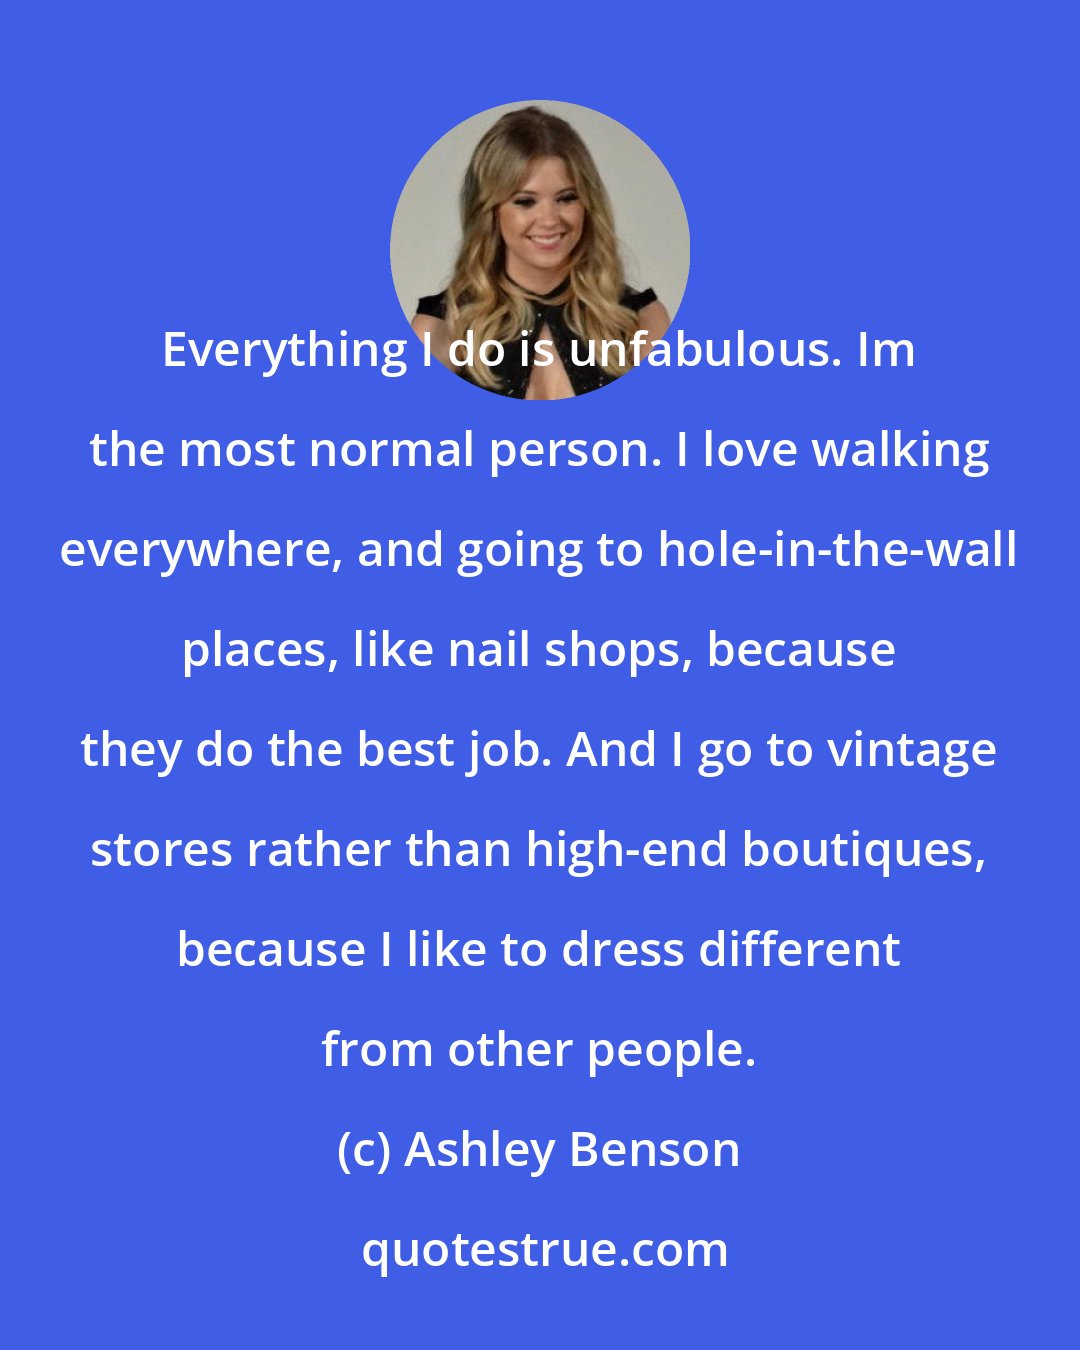 Ashley Benson: Everything I do is unfabulous. Im the most normal person. I love walking everywhere, and going to hole-in-the-wall places, like nail shops, because they do the best job. And I go to vintage stores rather than high-end boutiques, because I like to dress different from other people.